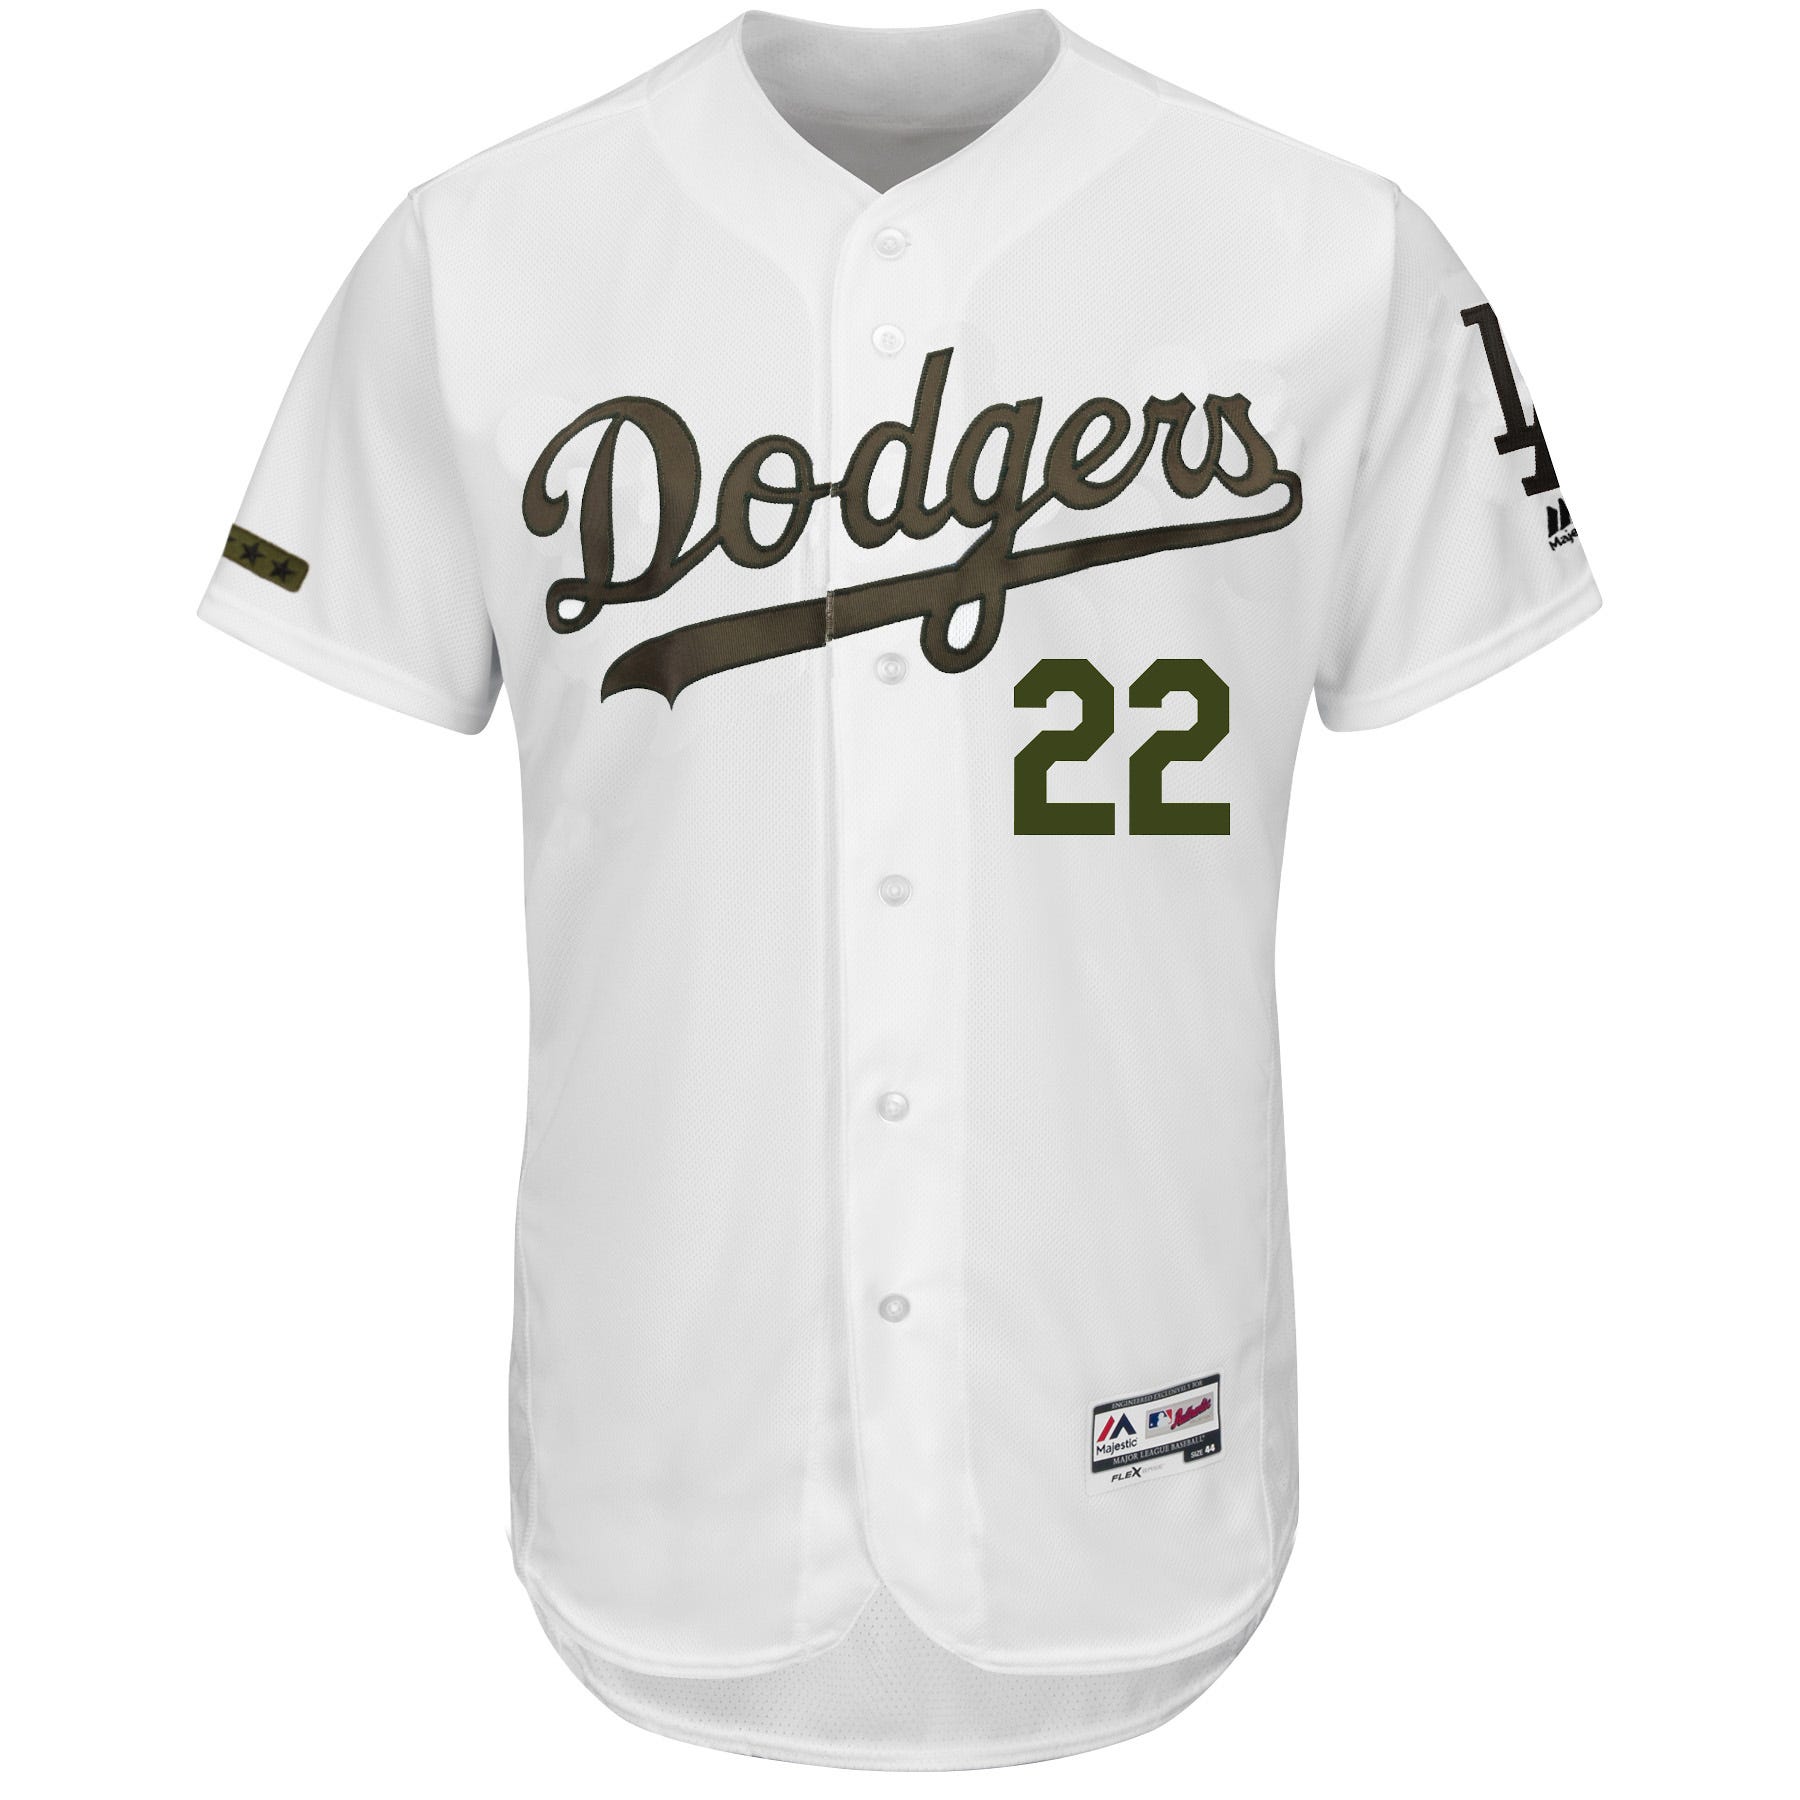 dodgers mother's day jersey